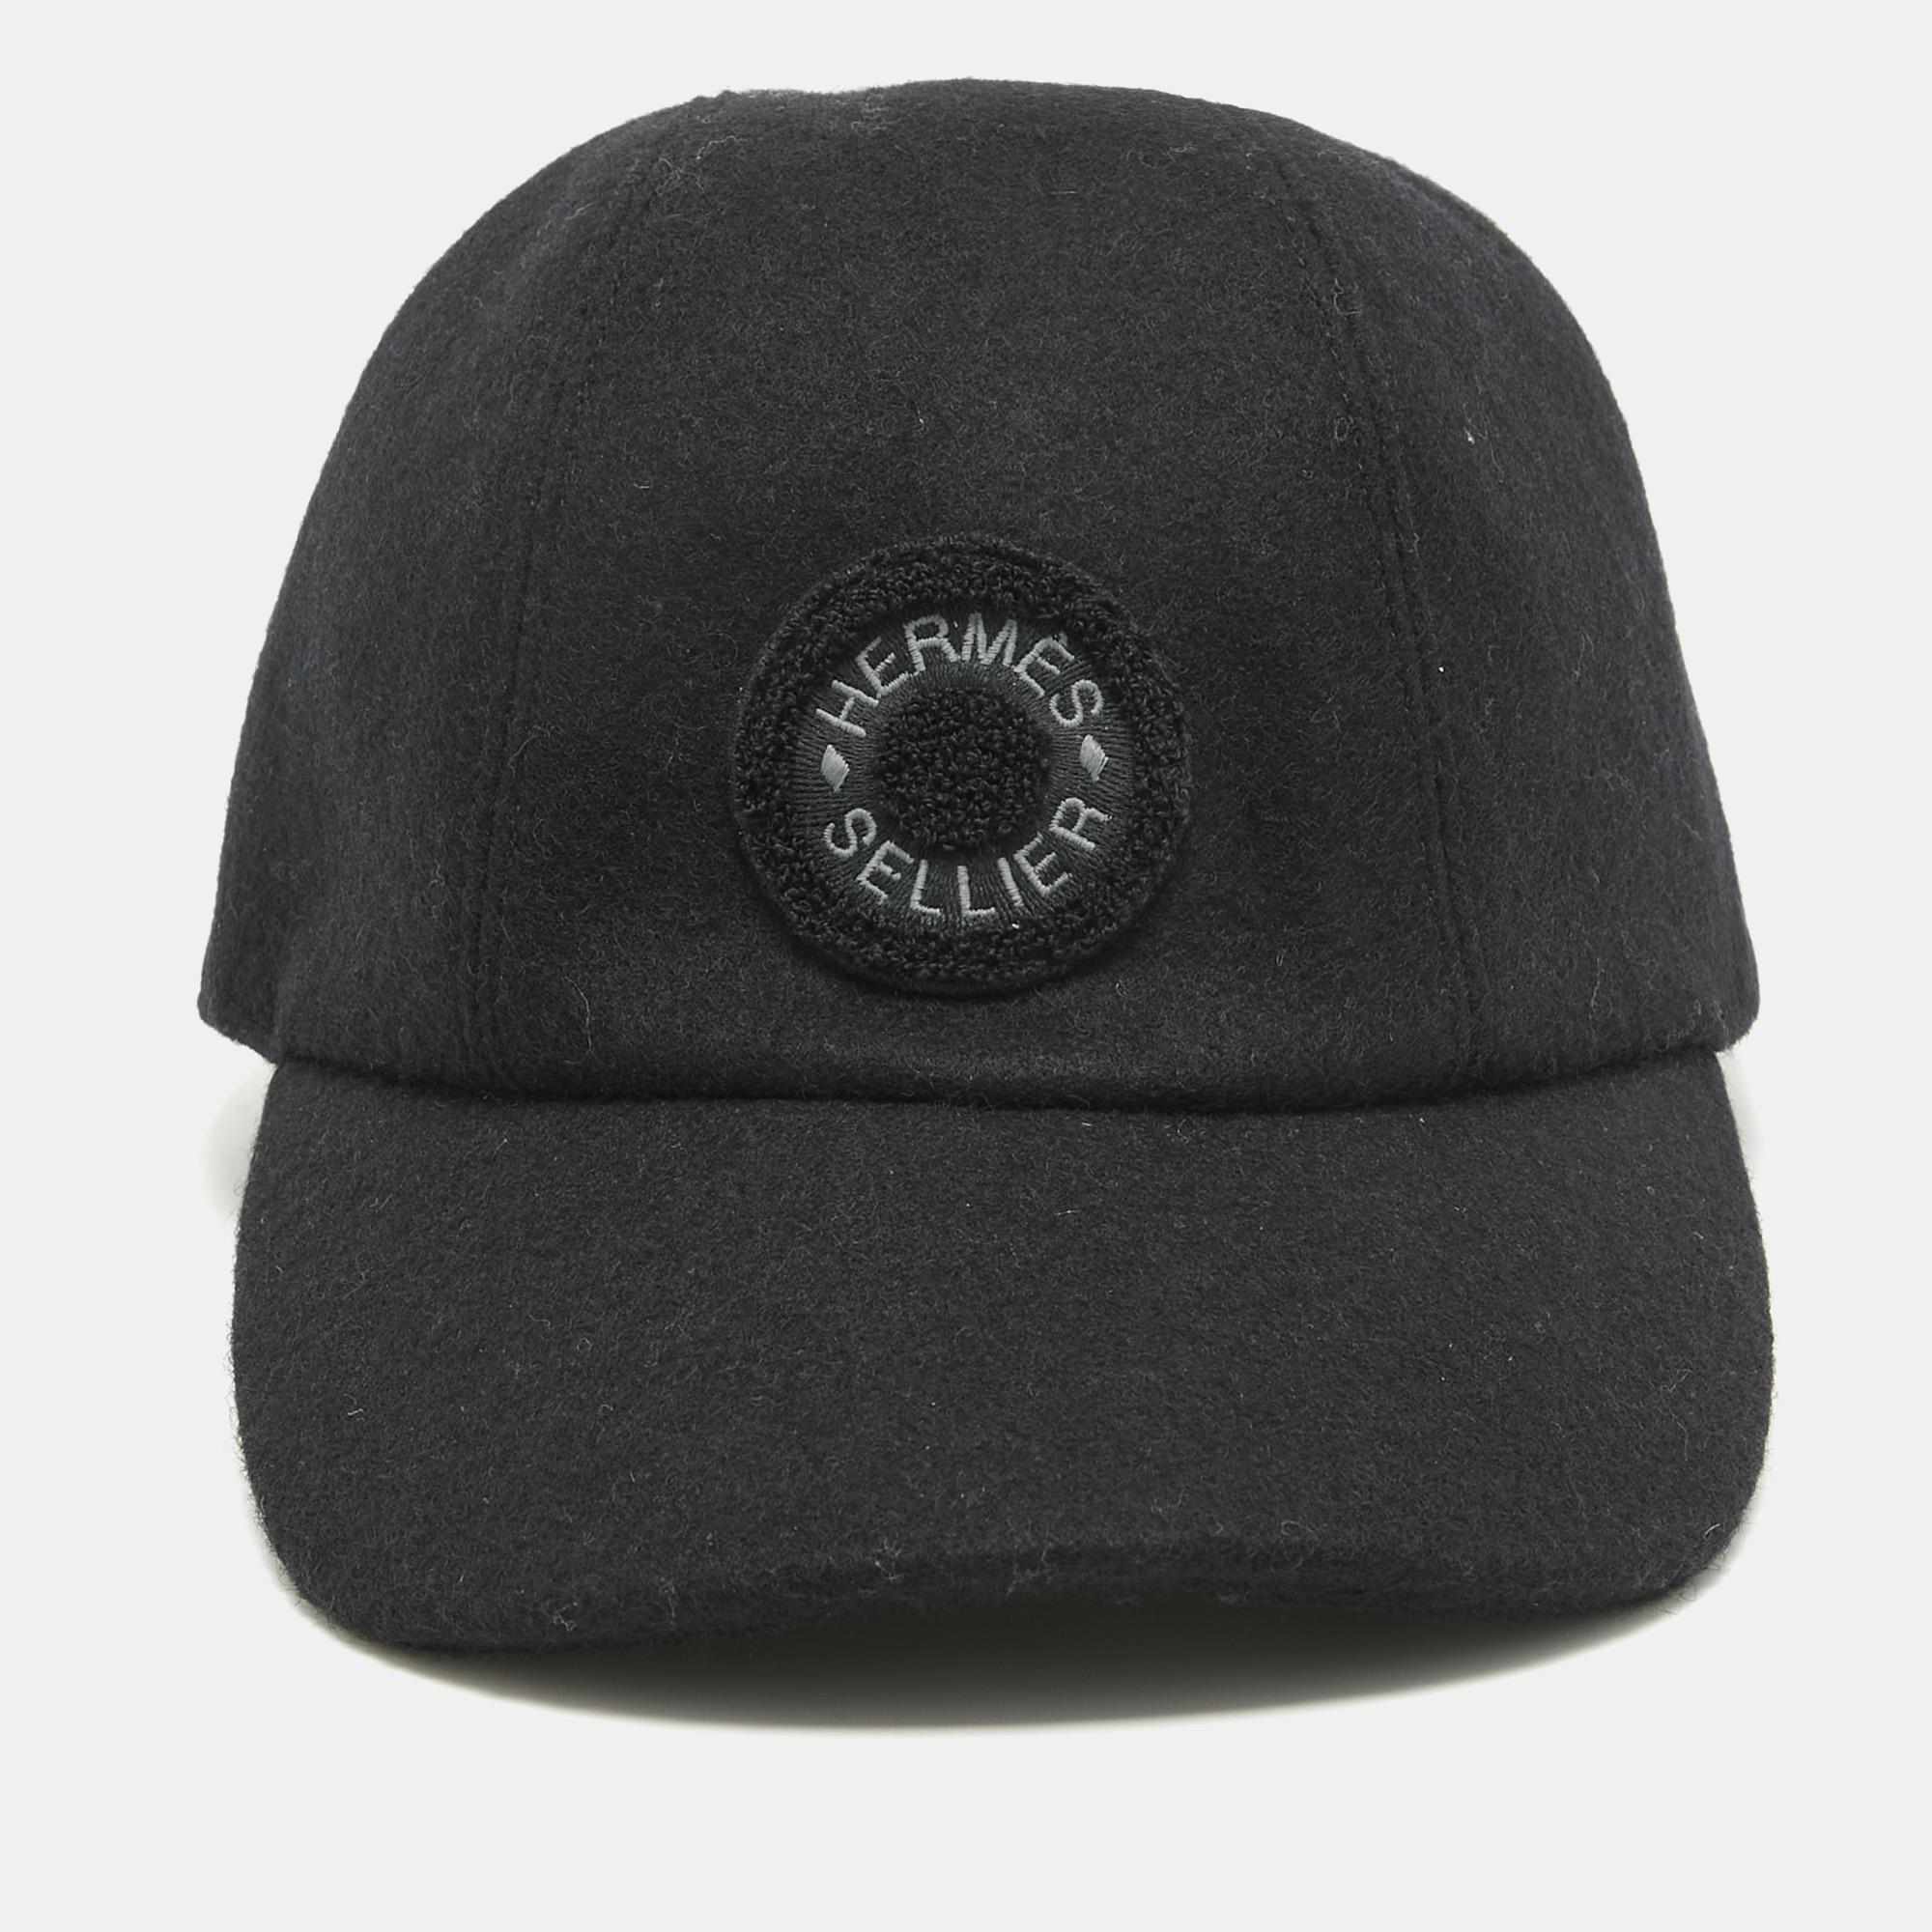 Caps are an ideal style statement with casual outfits. This Hermes piece is made from quality materials and features signature elements. This piece will be a smart addition to your cap collection.

